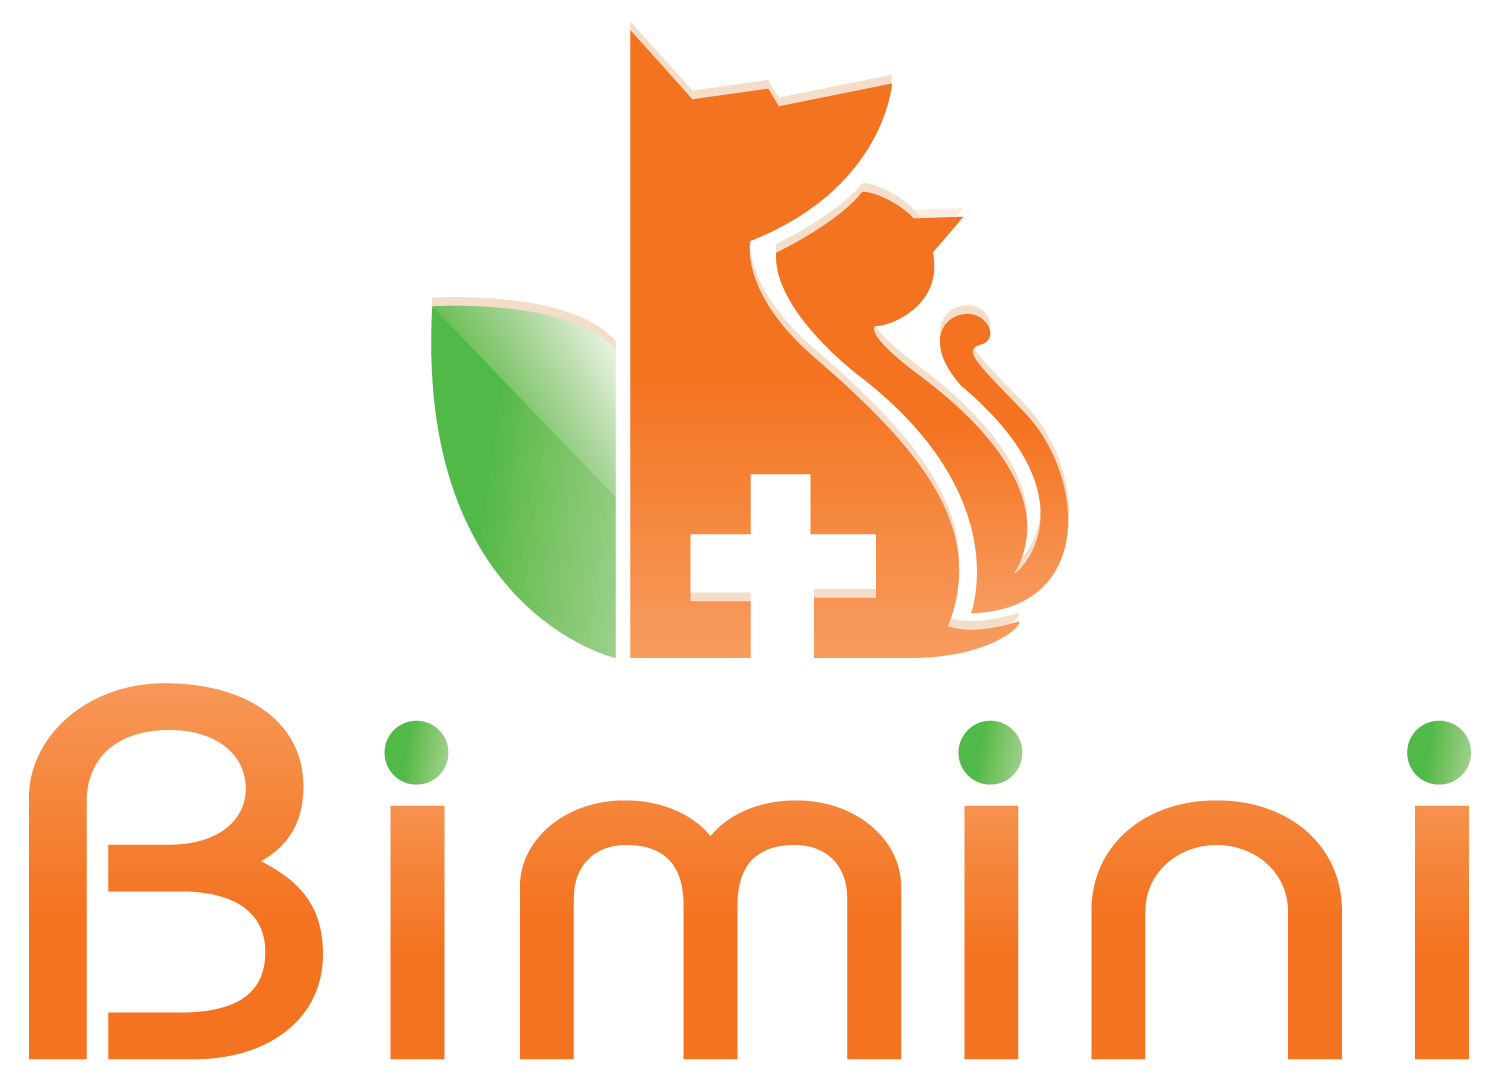 Bimini Pet Health is a Topeka-based manufacturer of pet health supplements and treats.